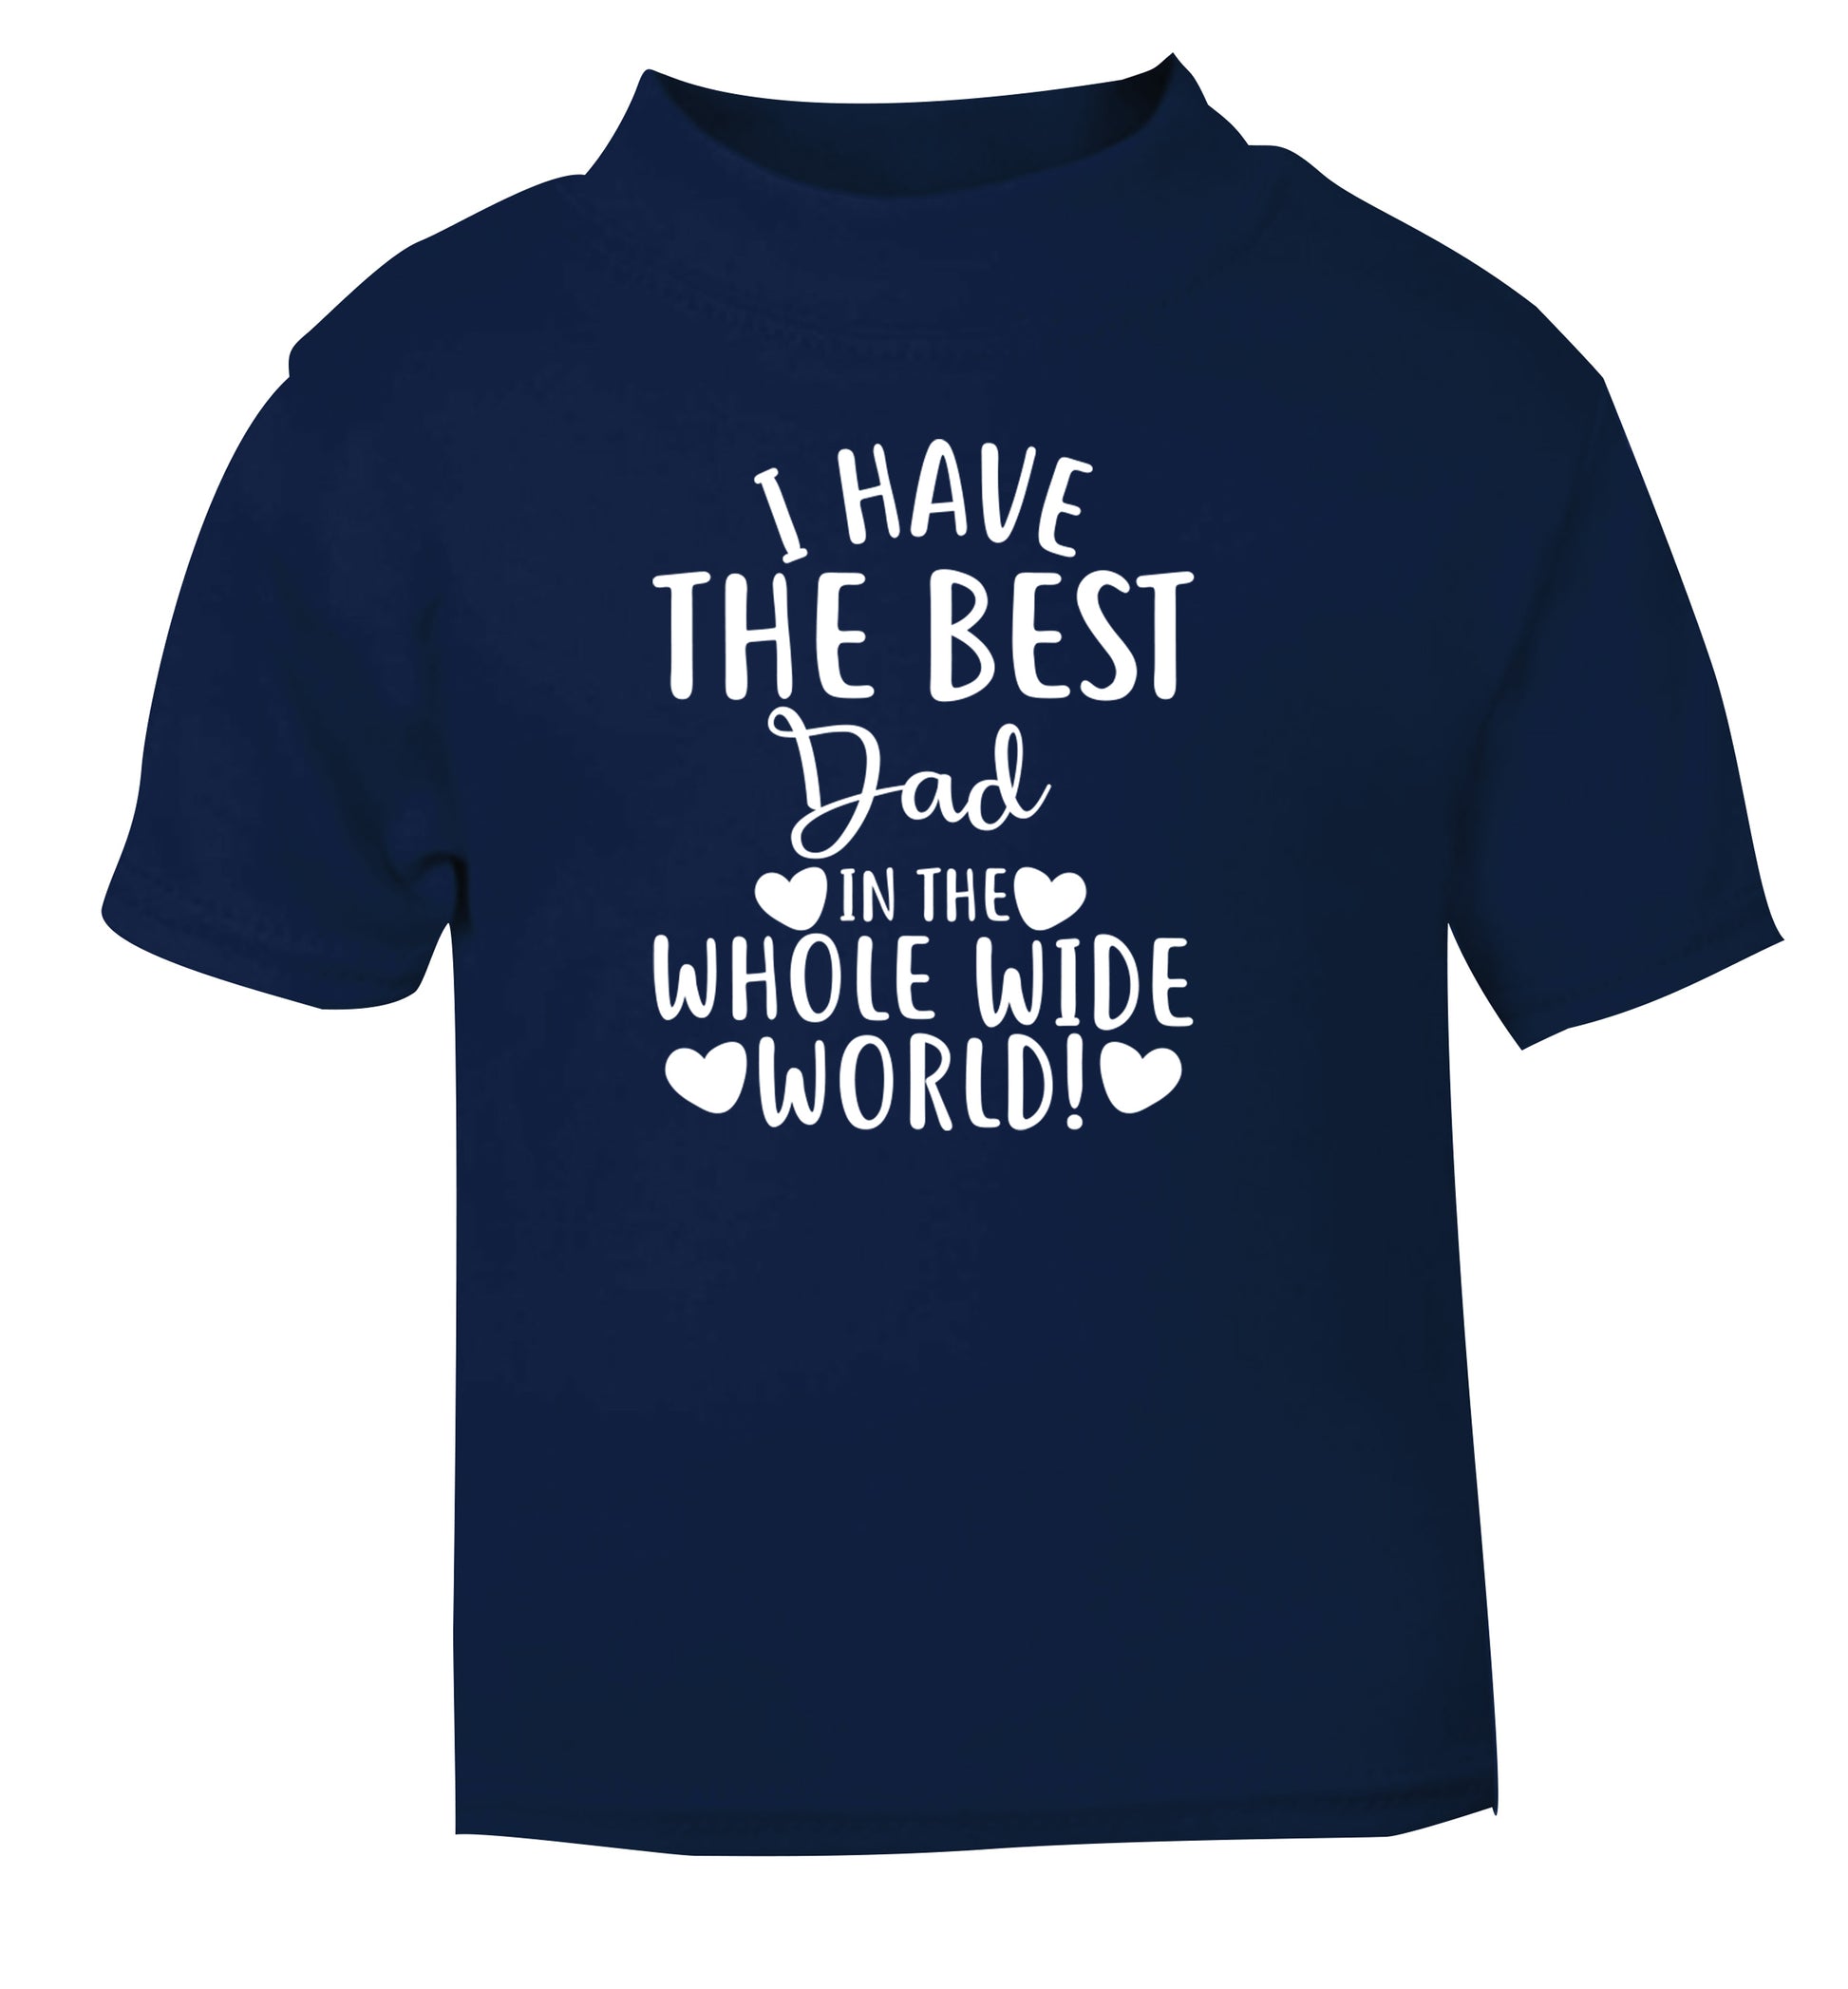 I have the best dad in the whole wide world! navy Baby Toddler Tshirt 2 Years